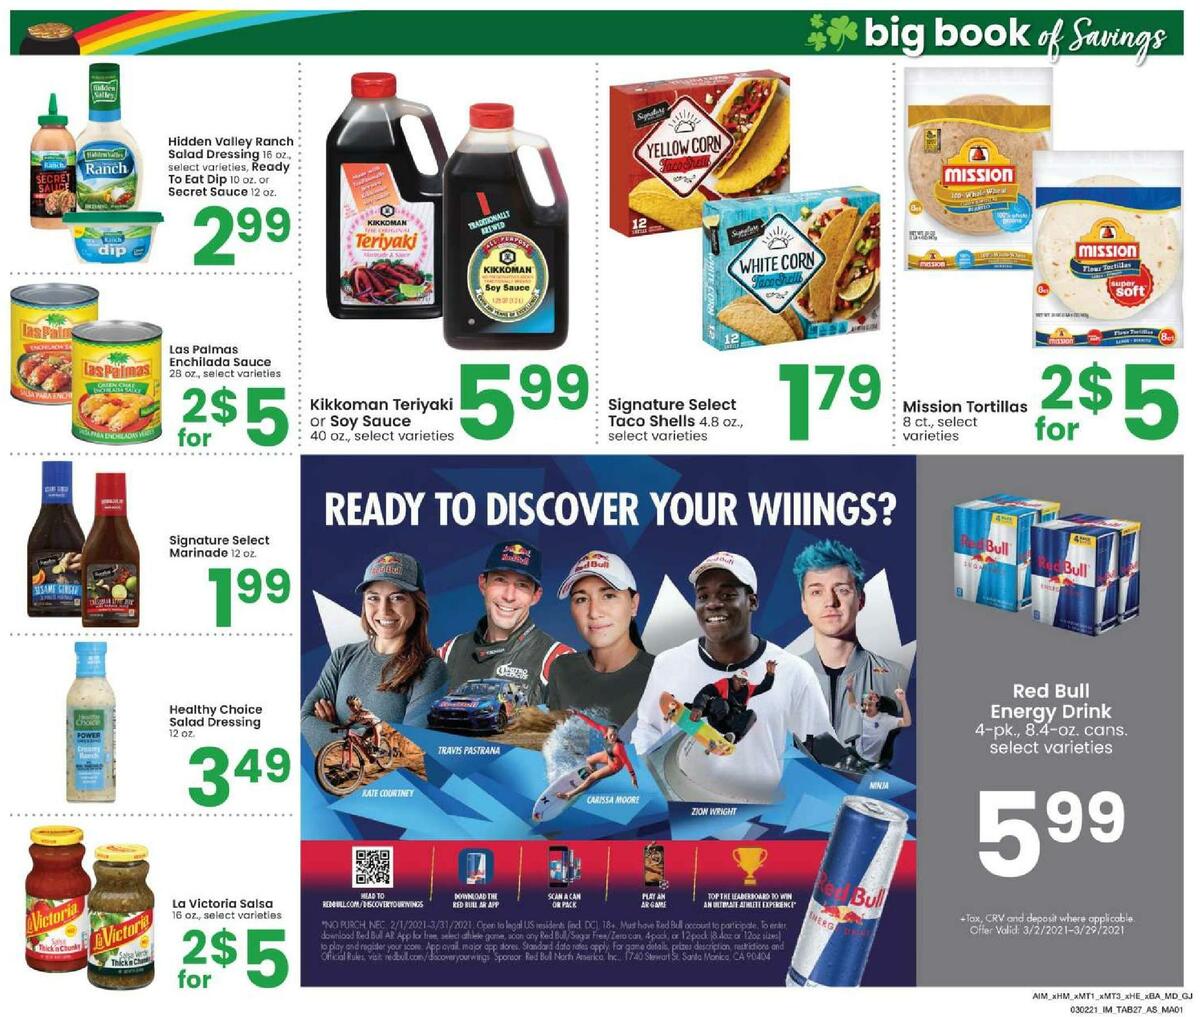 Albertsons Magazine Weekly Ad from March 2